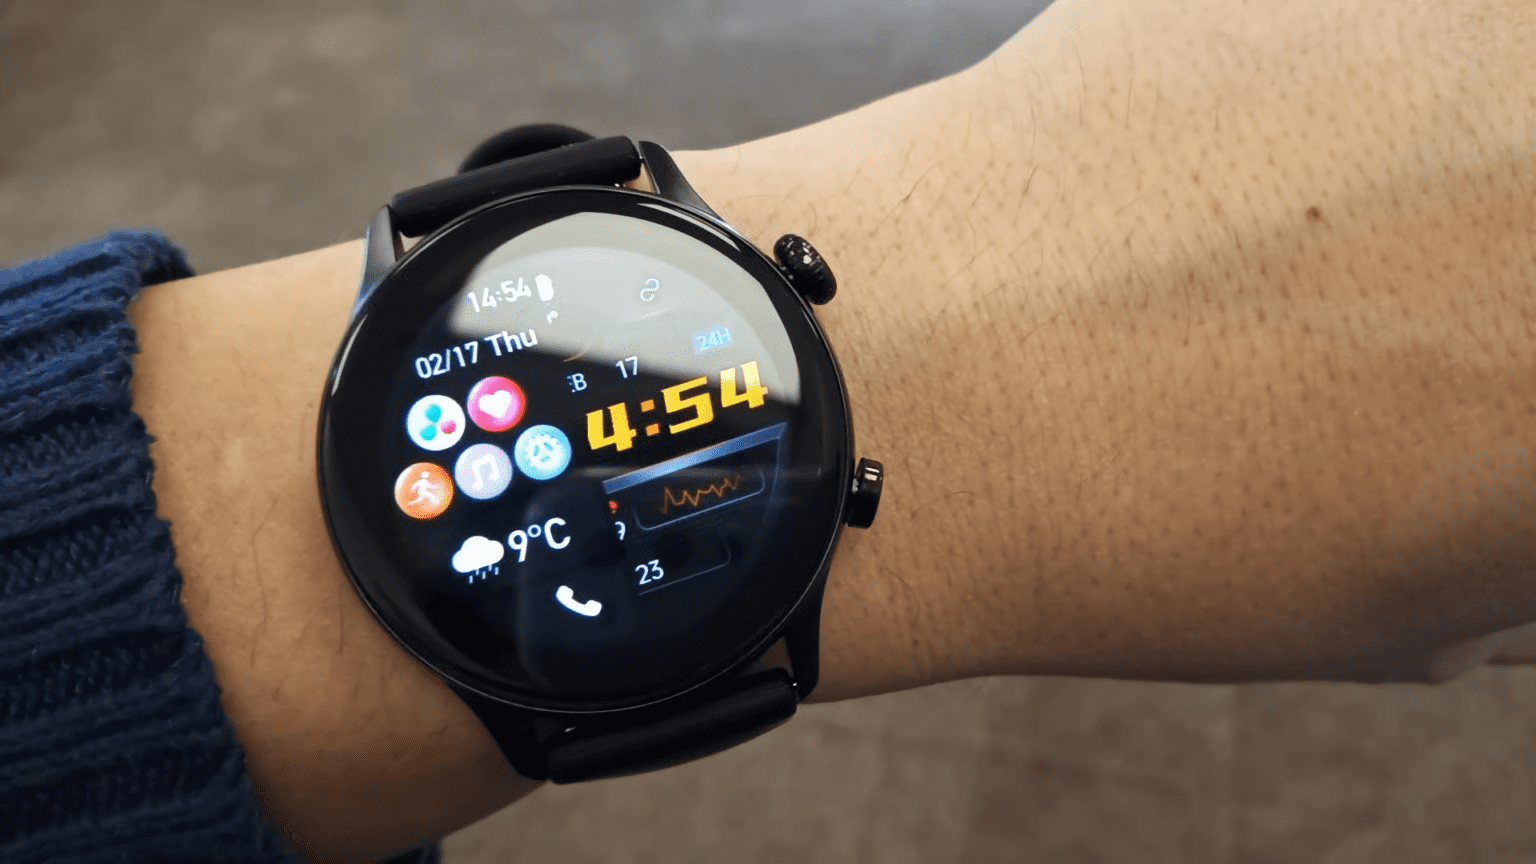 Colmi i30 Review - New Smartwatch with AMOLED Screen Under $50